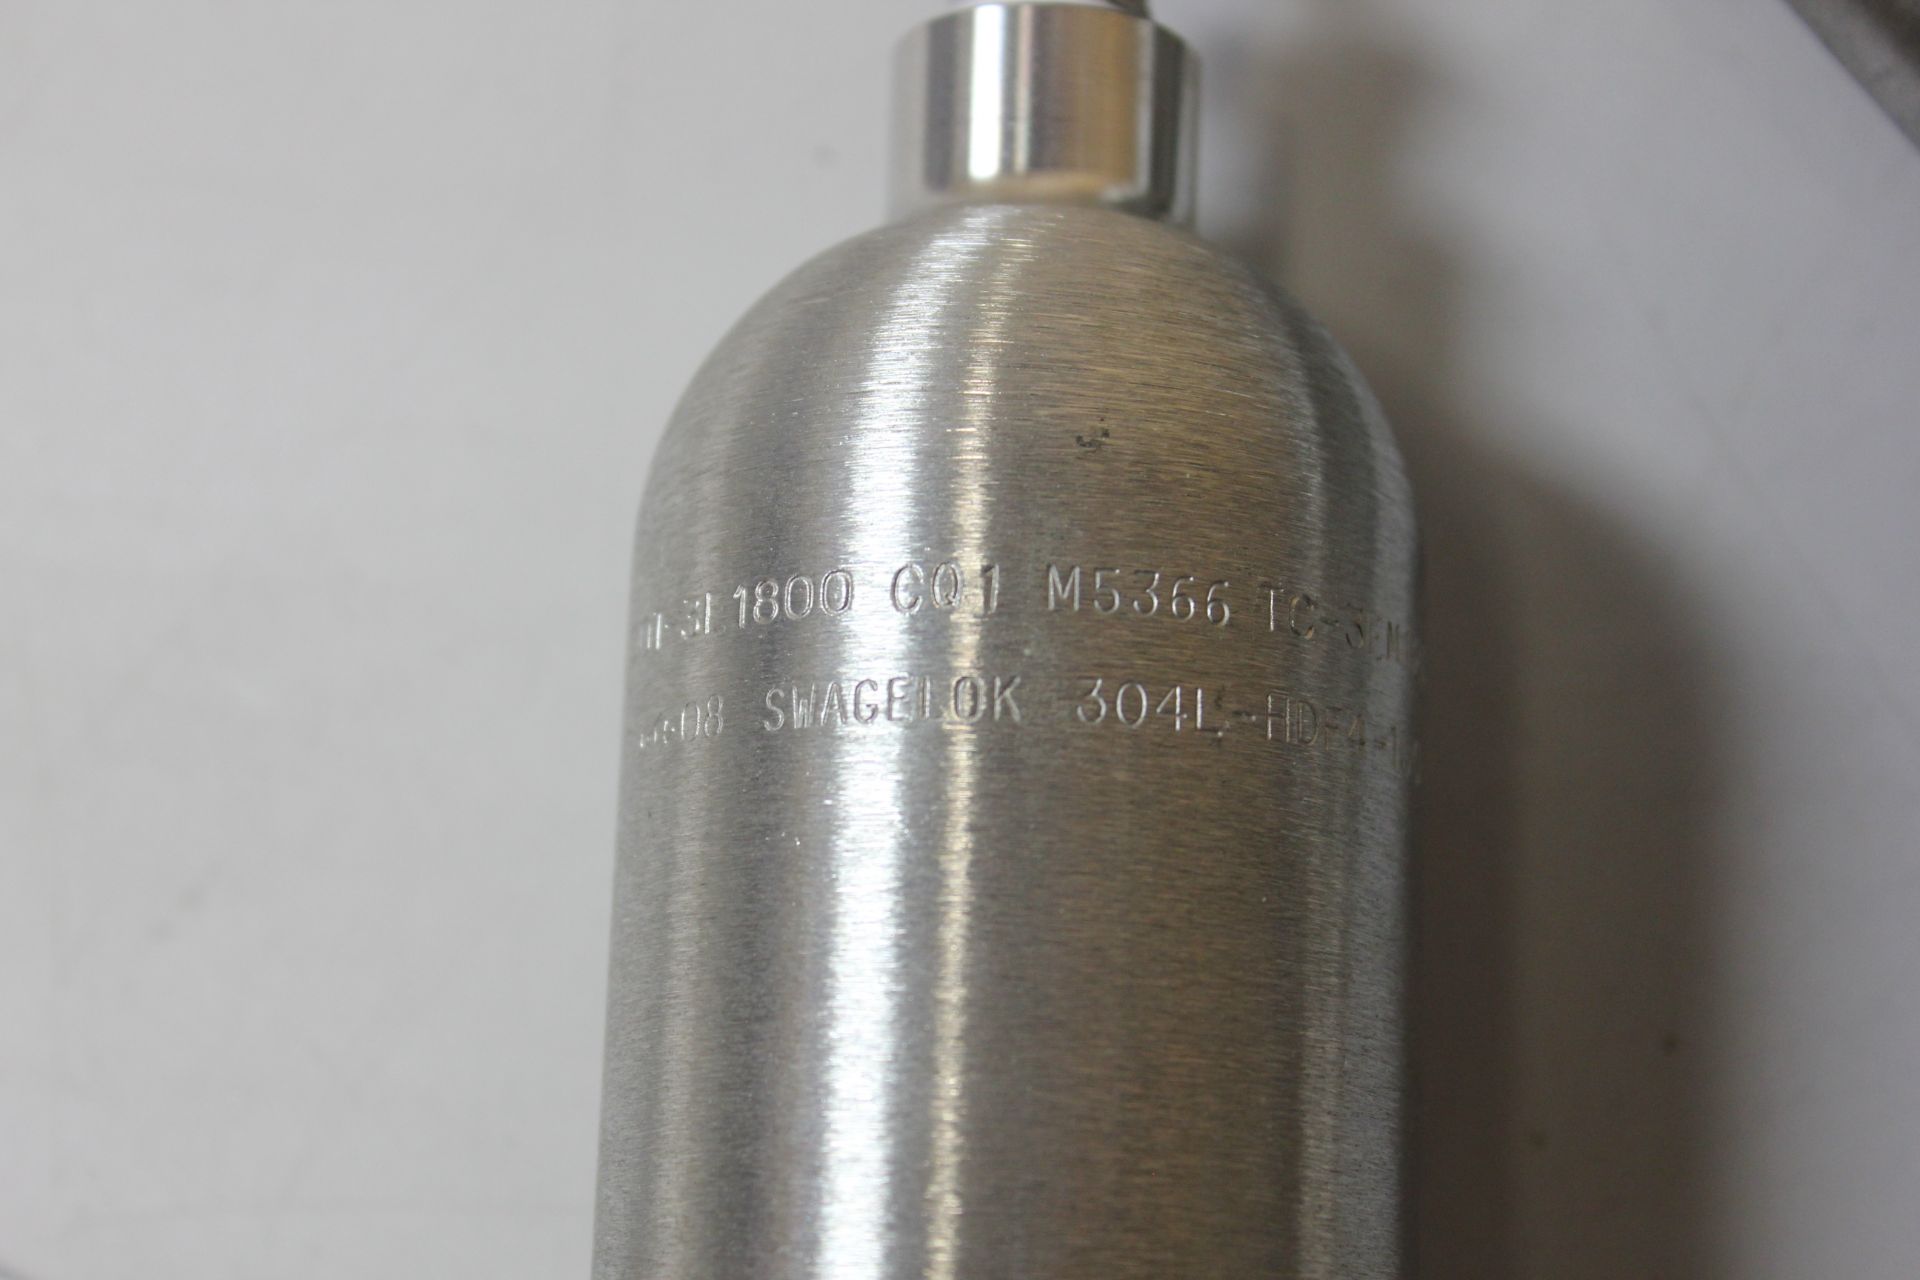 LOT OF SWAGELOK 304L STAINLESS STEEL SAMPLE CYLINDERS - Image 3 of 4